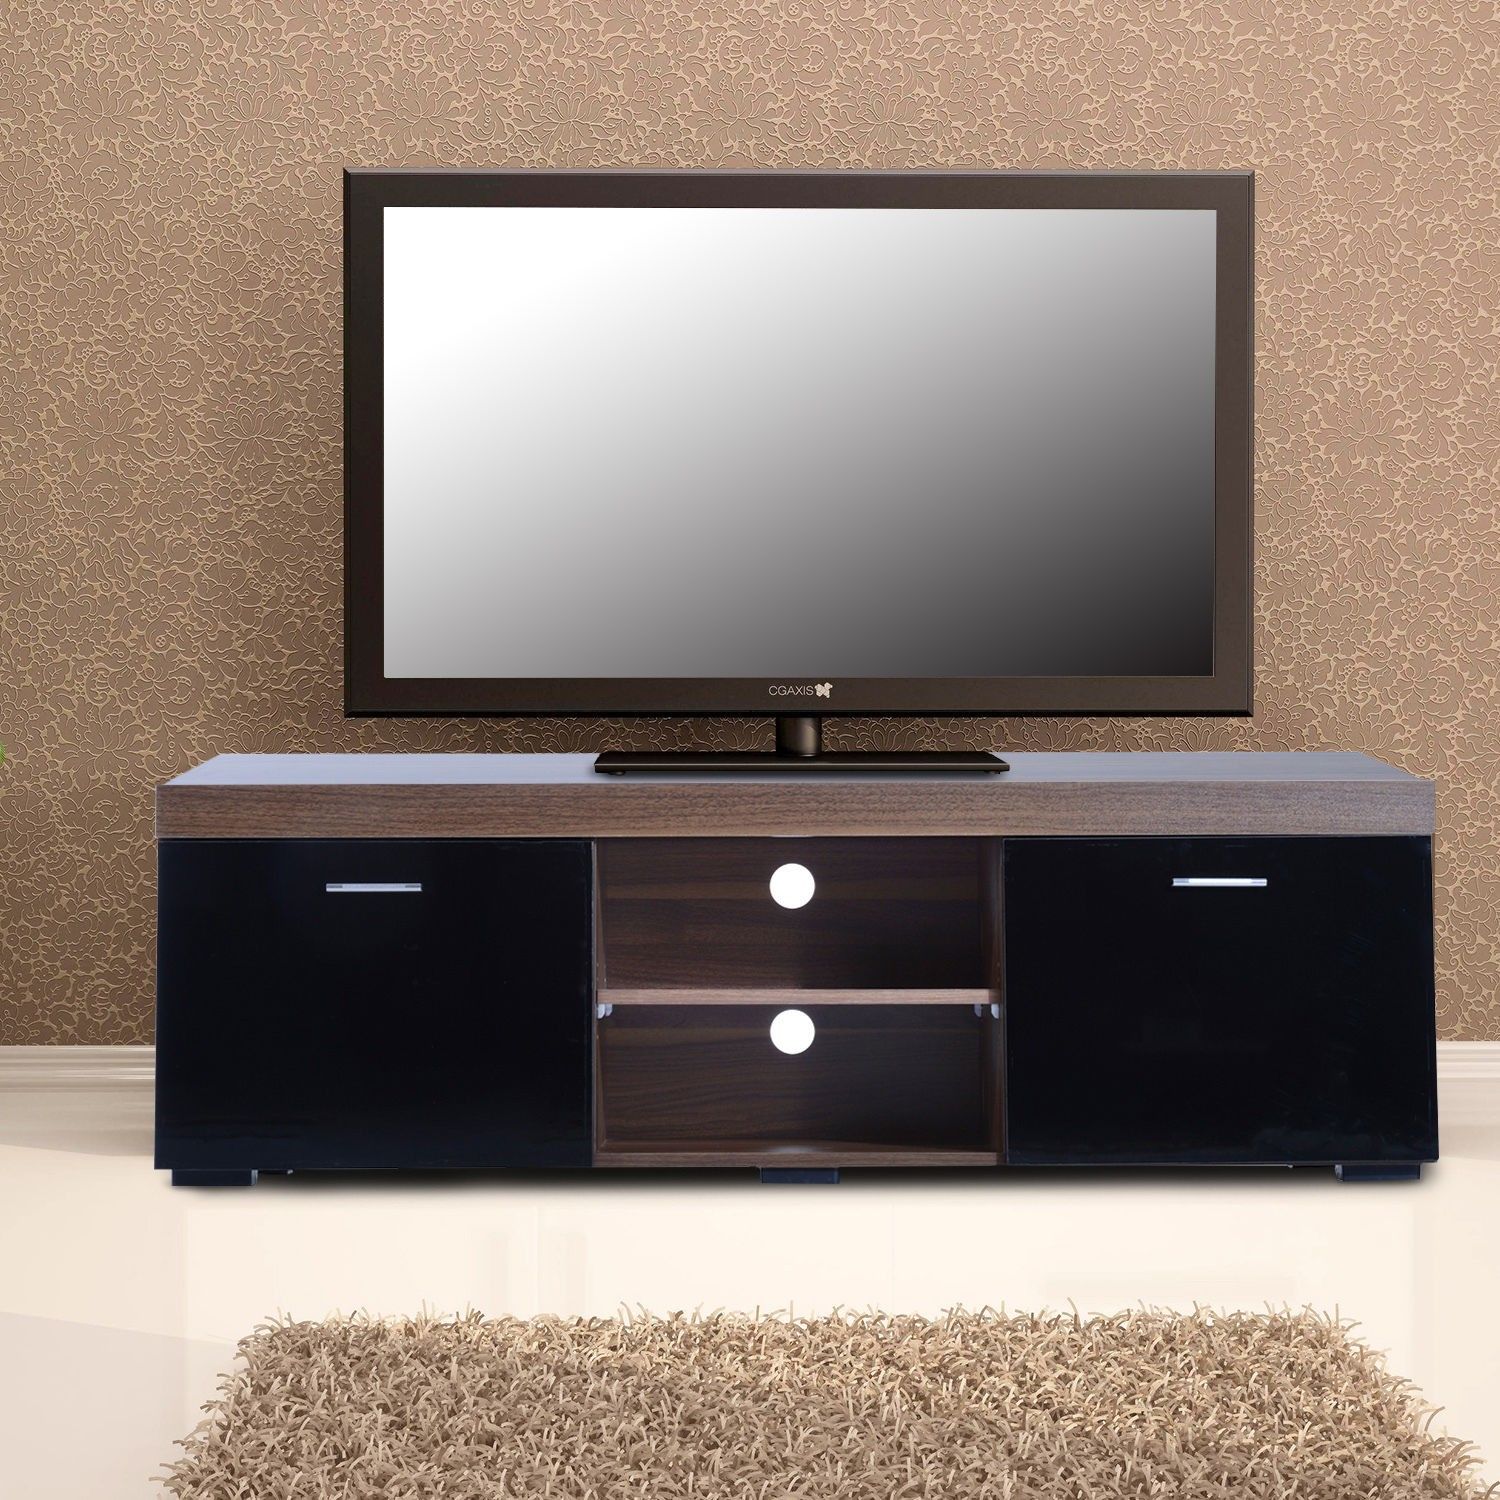 Homcom Tv Stand Storage Cabinet W/ Shelves Walnut/black Within Walnut Tv Cabinets With Doors (View 12 of 15)